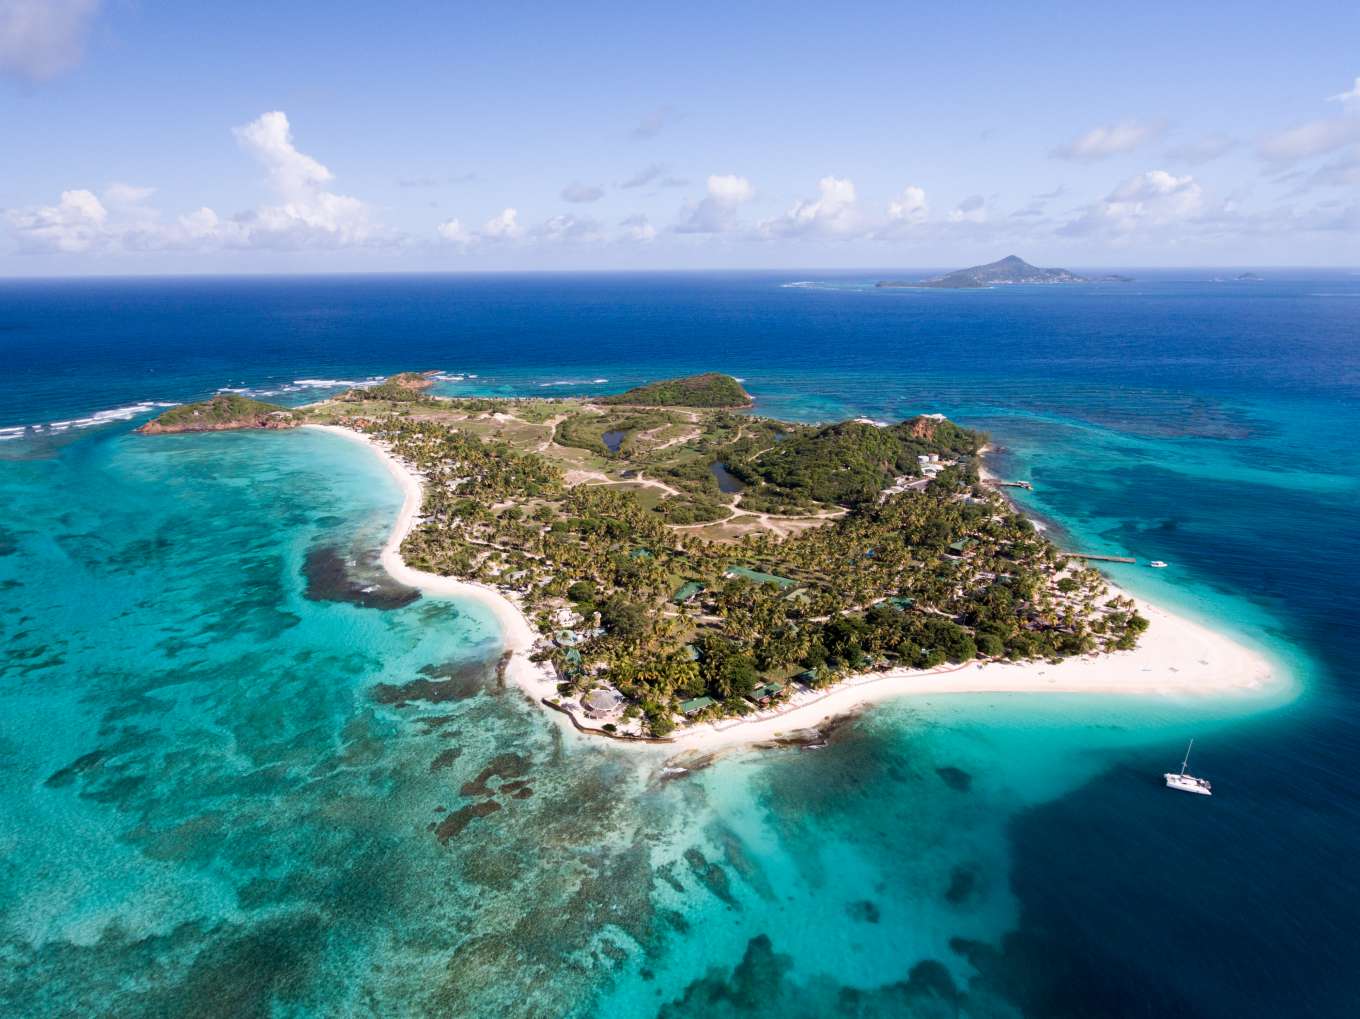 Palm Island The Grenadines - SVG , Caribbean - Private Islands for Rent